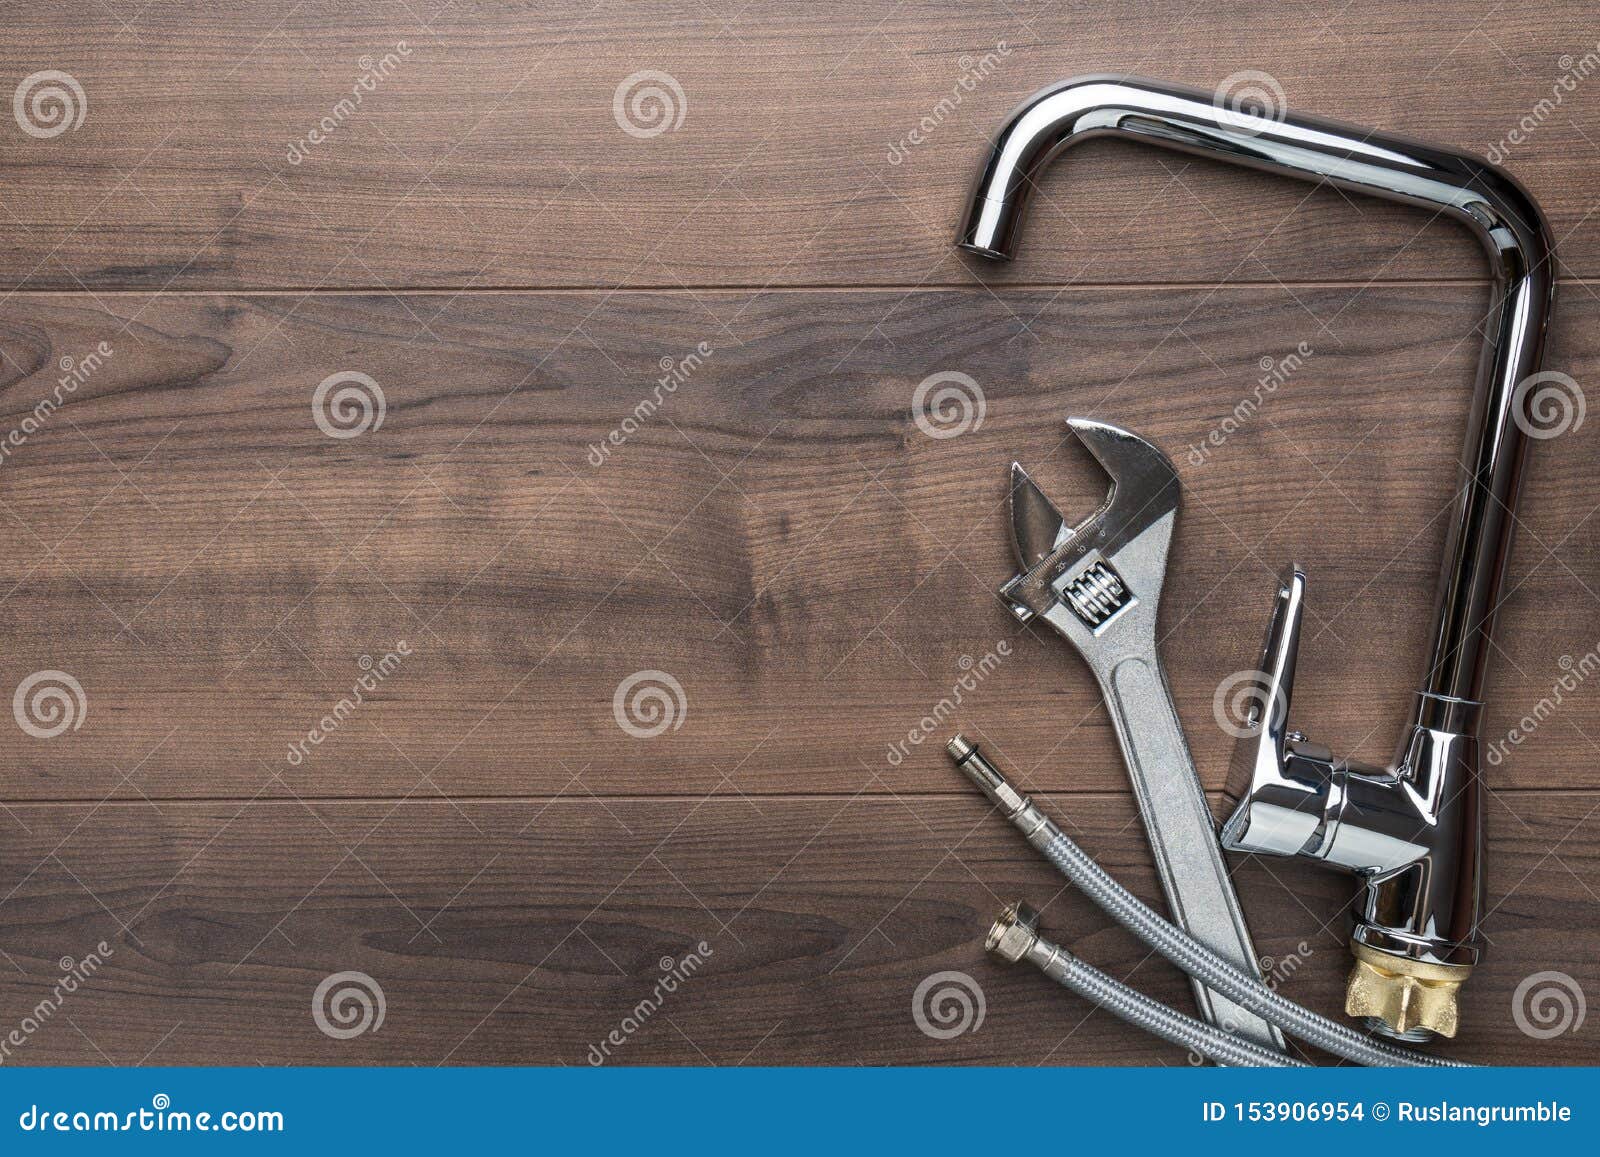 top view photo of plumbing tools over wooden background with copy space.